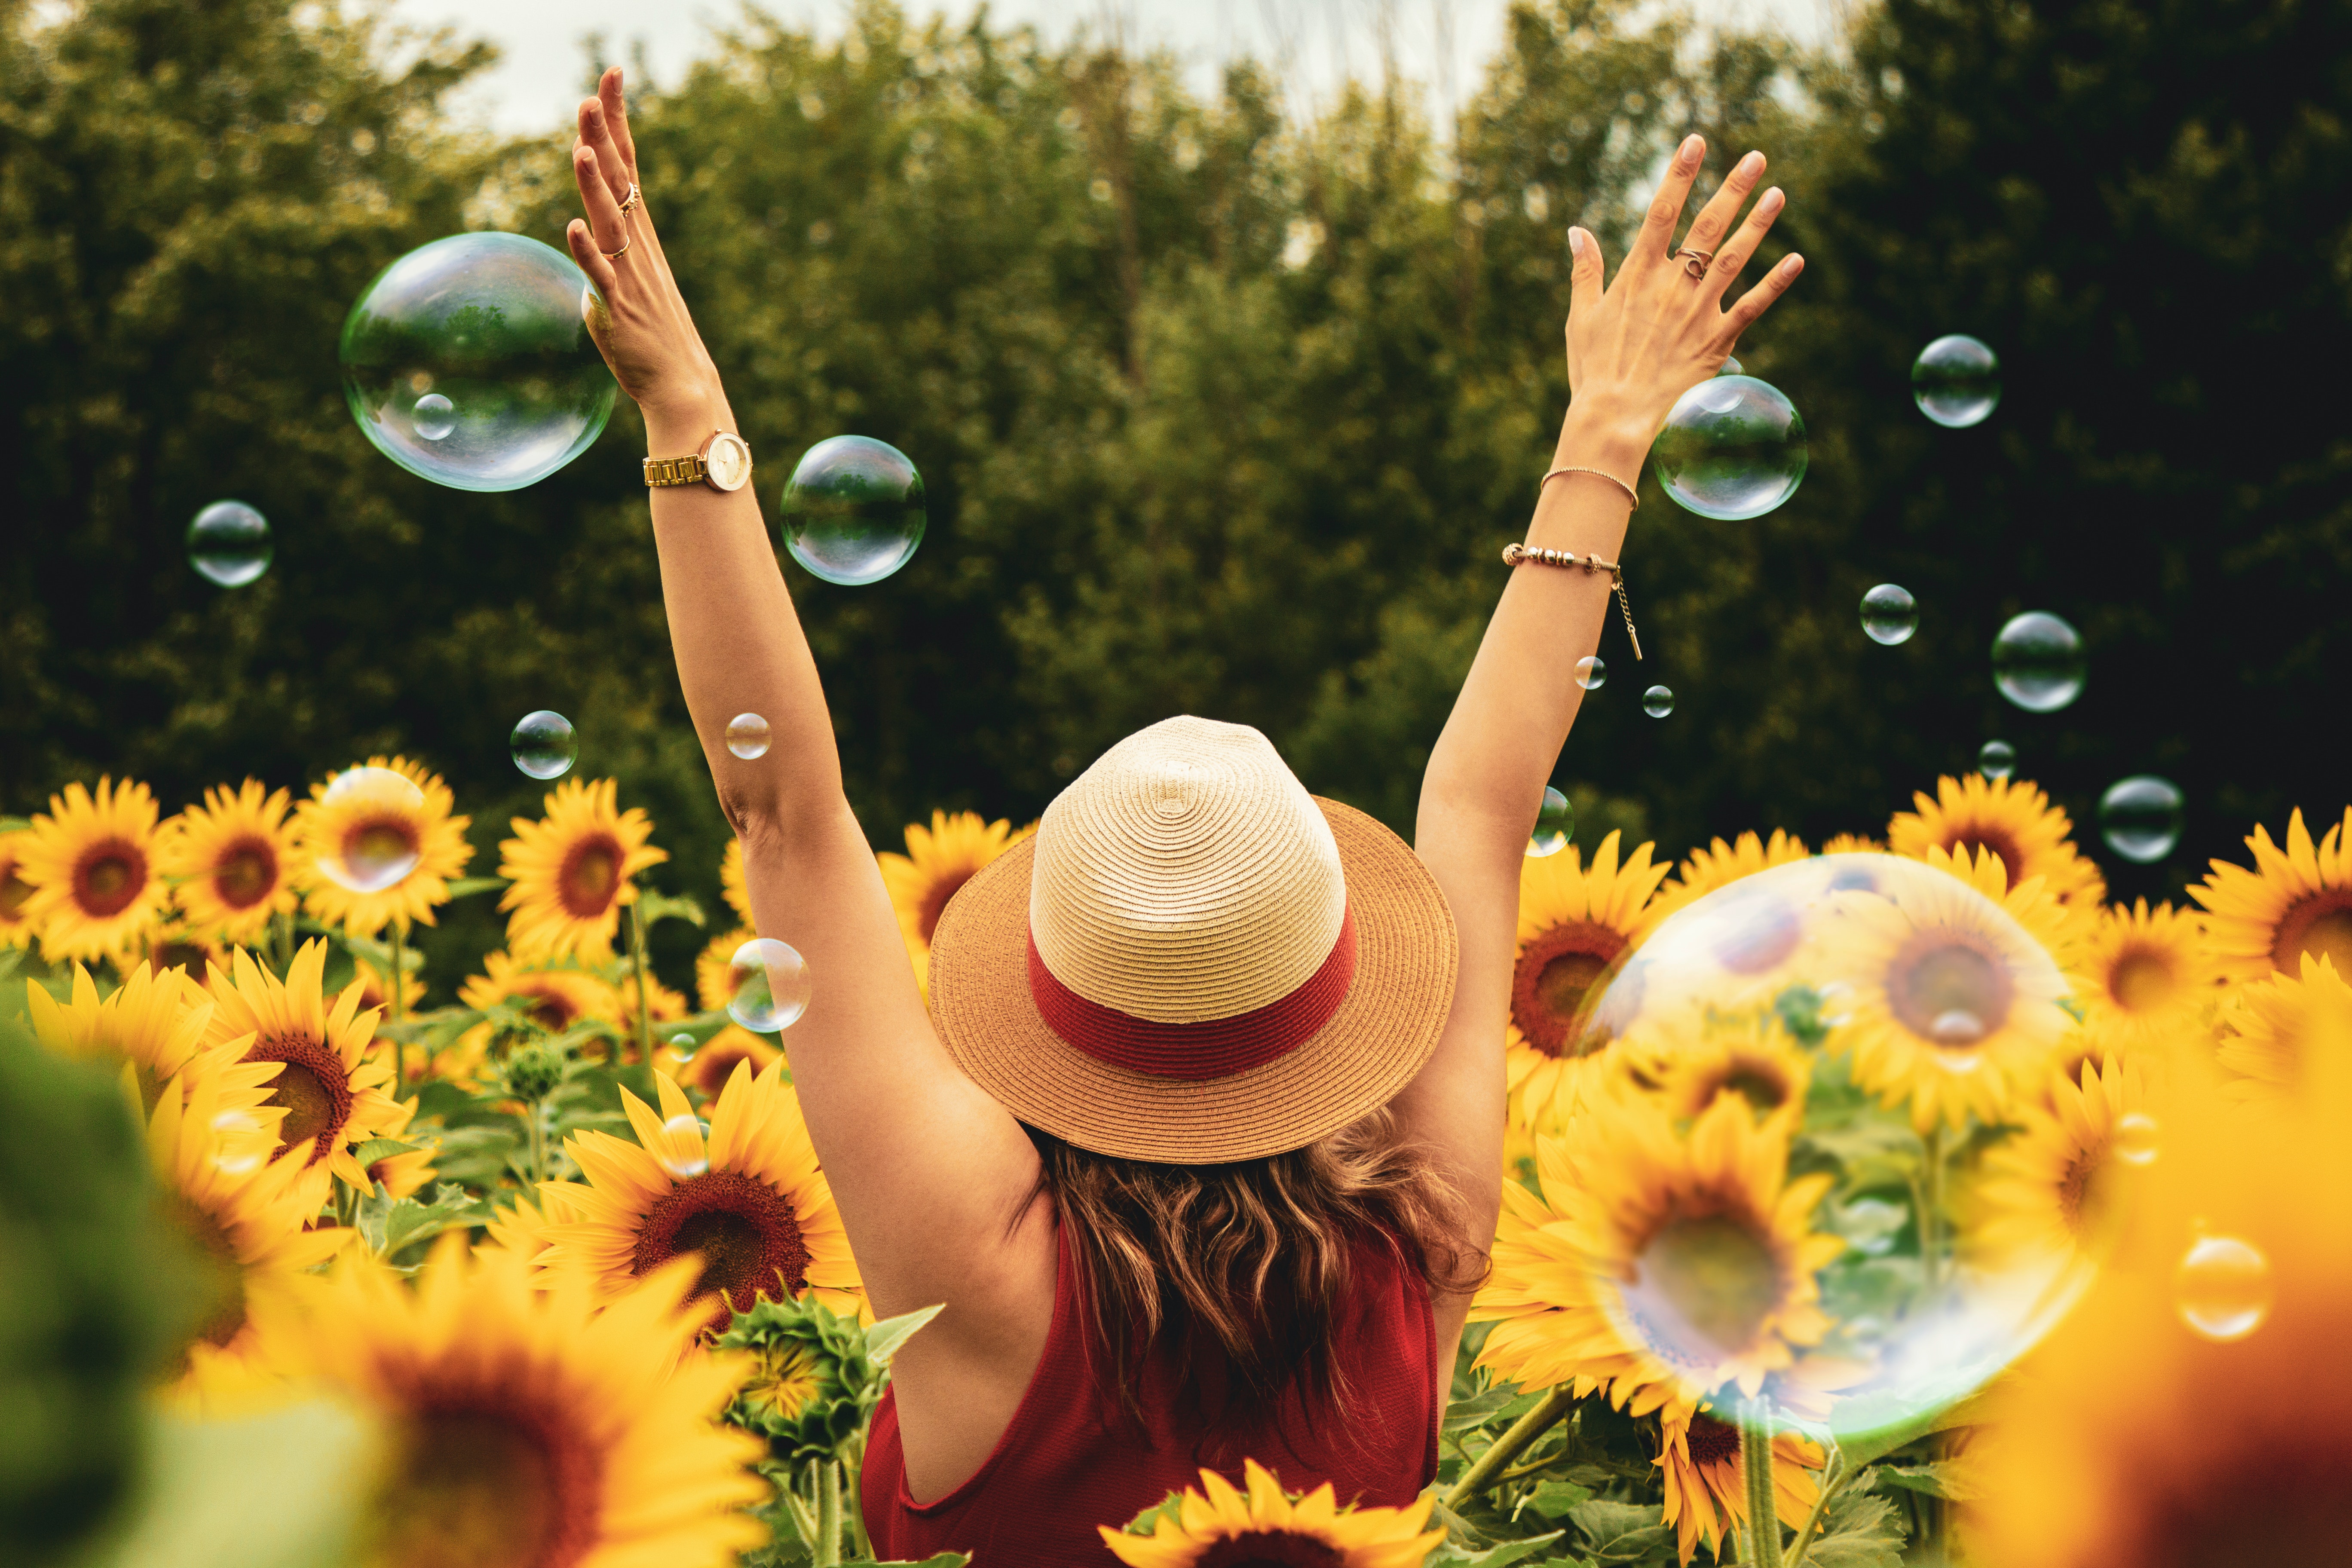 Person raising their arms in air surrounded by sunflowers